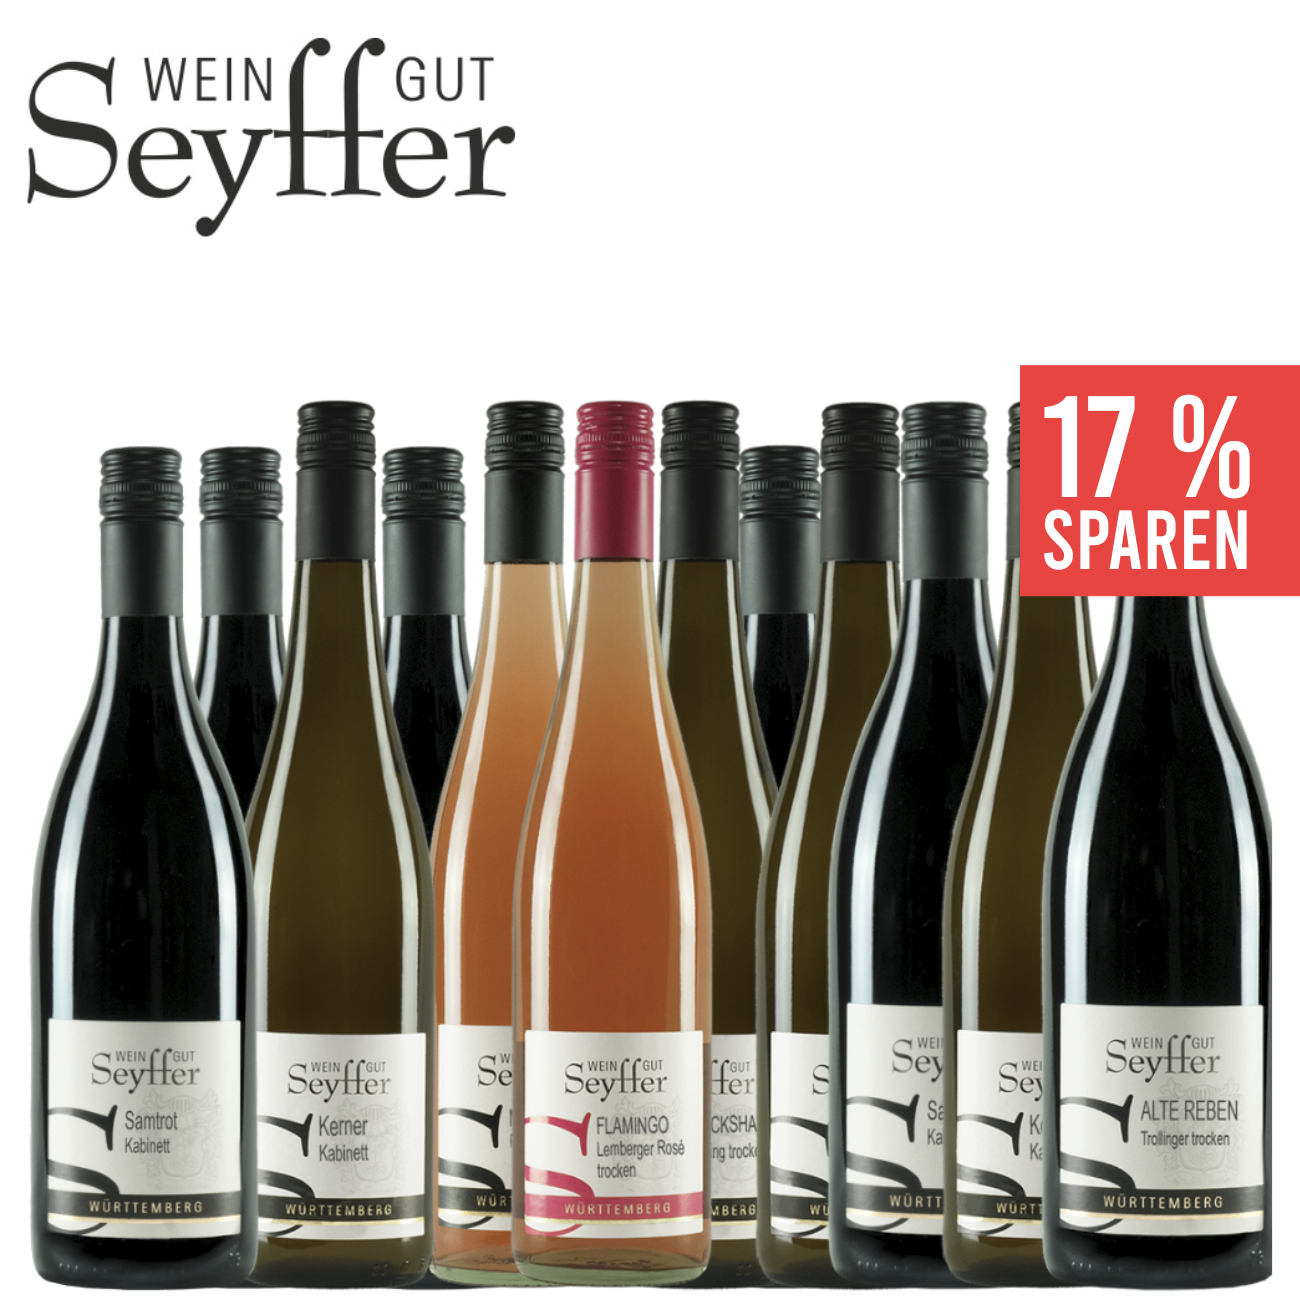 wein.plus The our | of wines members find+buy: find+buy wein.plus